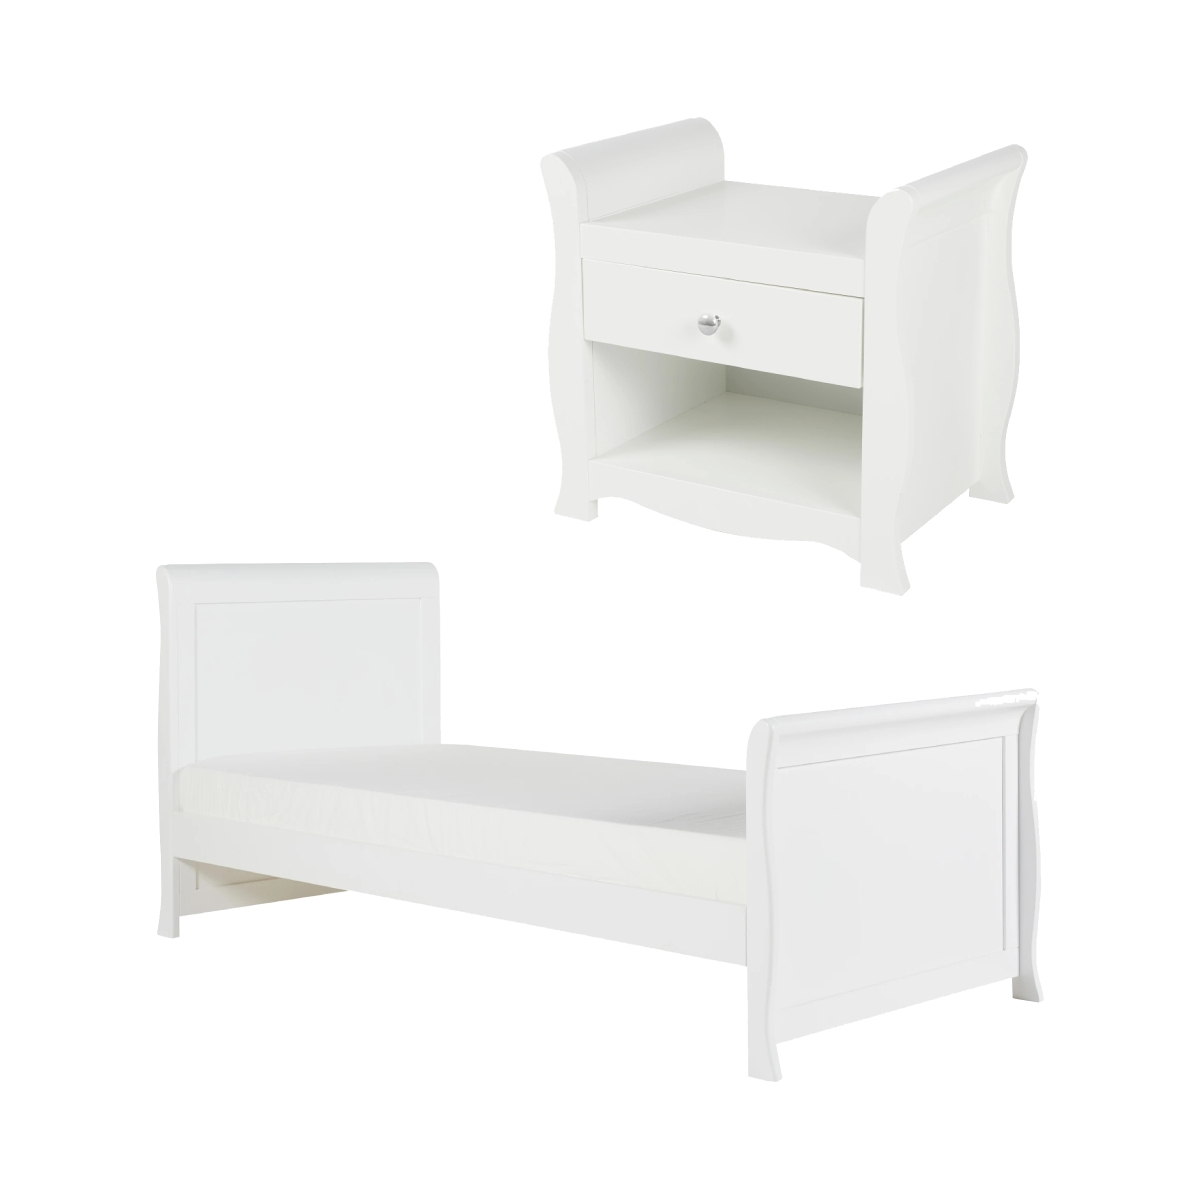 Ickle Bubba Snowdon Single Bed and Bedside Cabinet